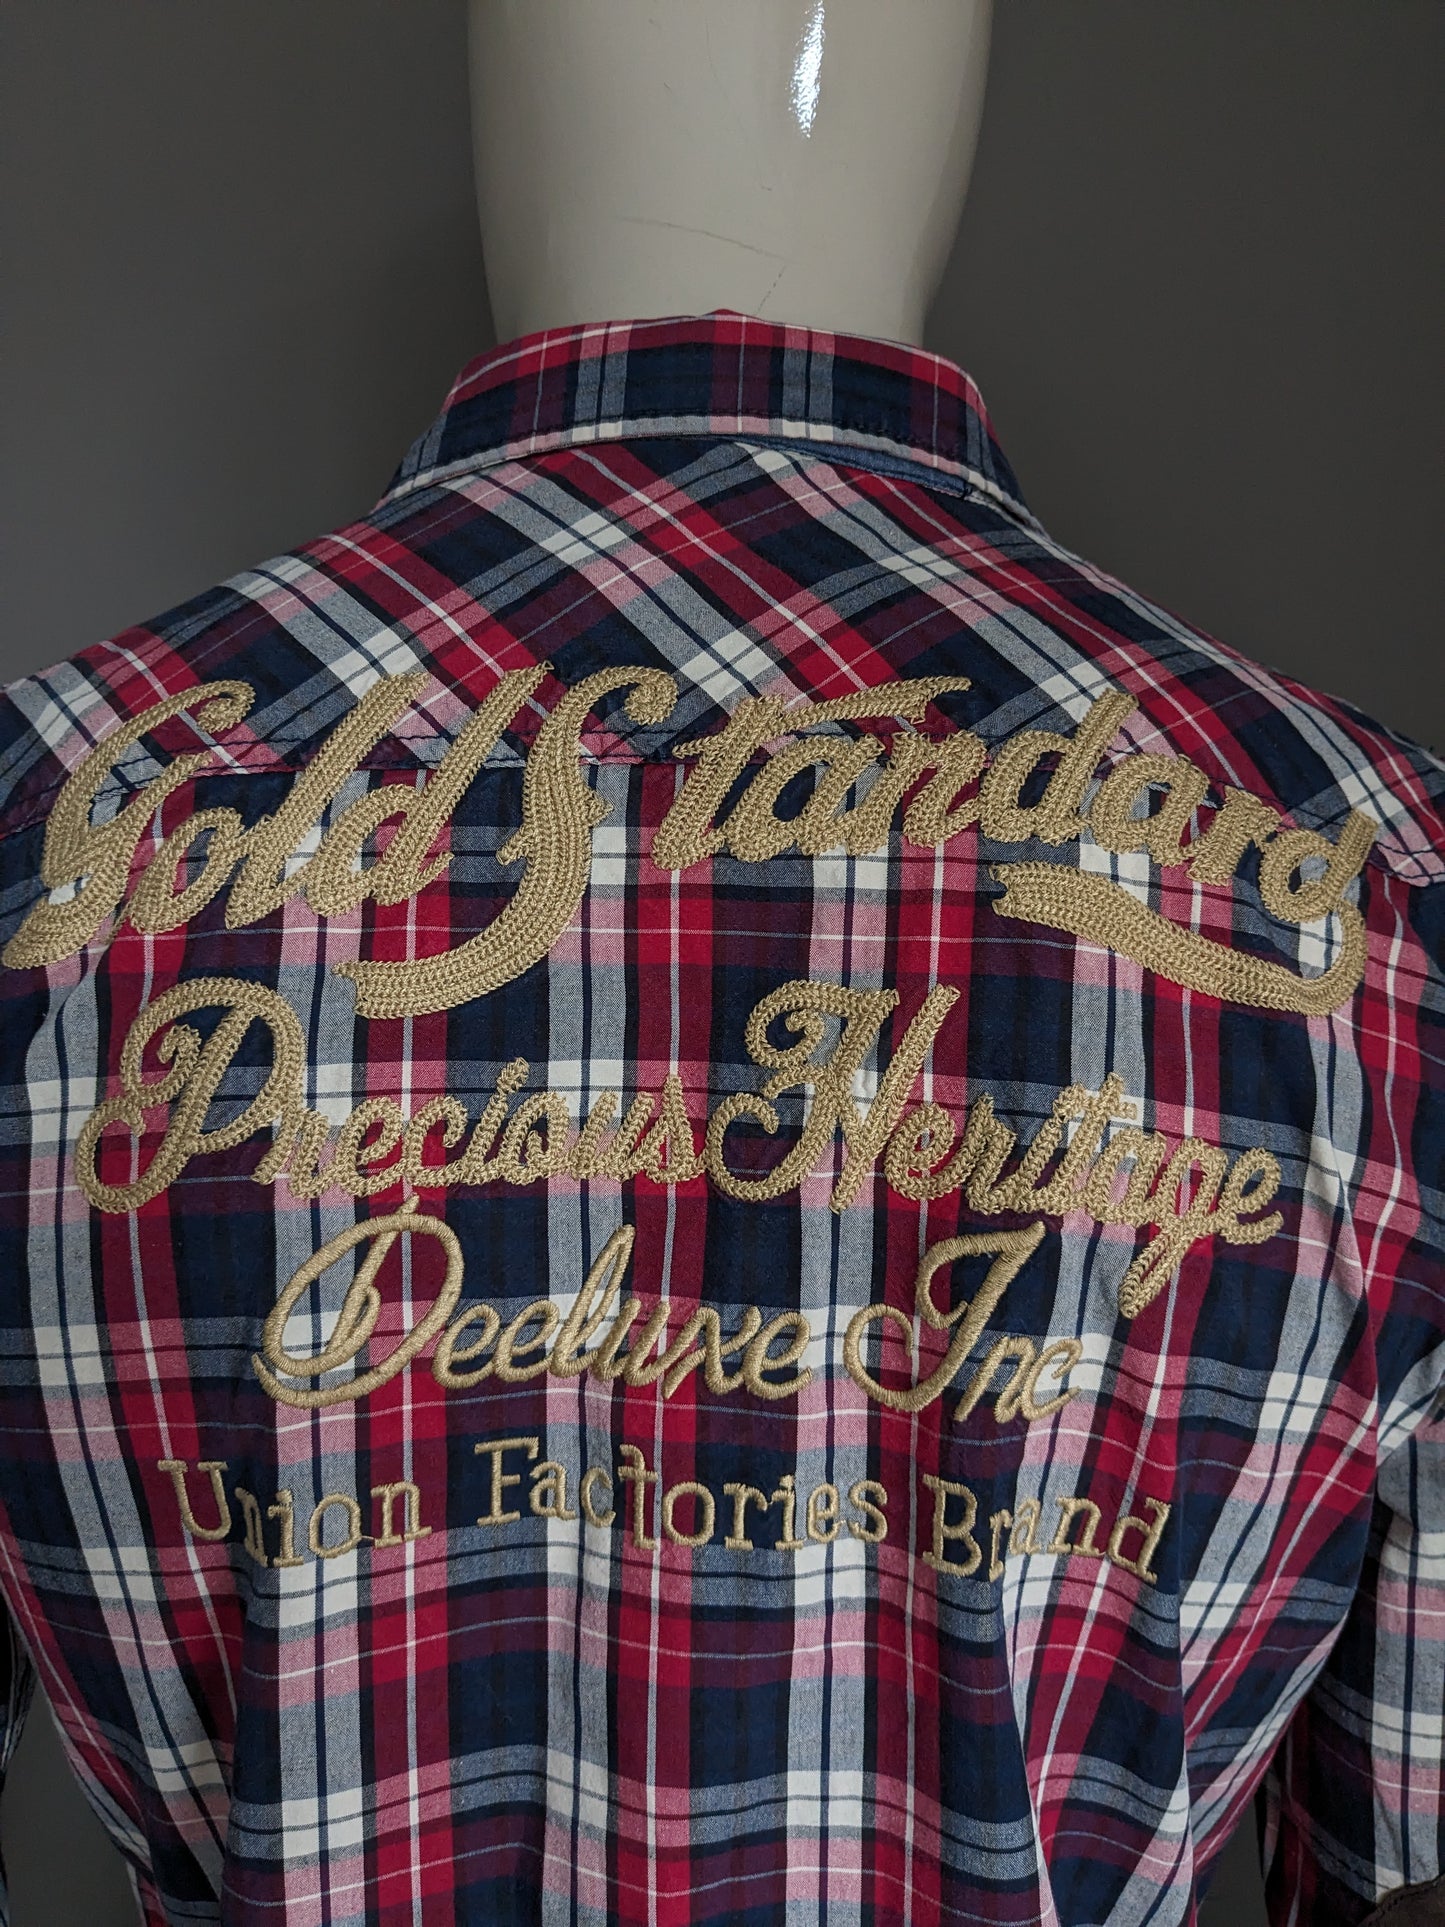 Partuxe shirt. Blue red white checkered with applications. Size L.